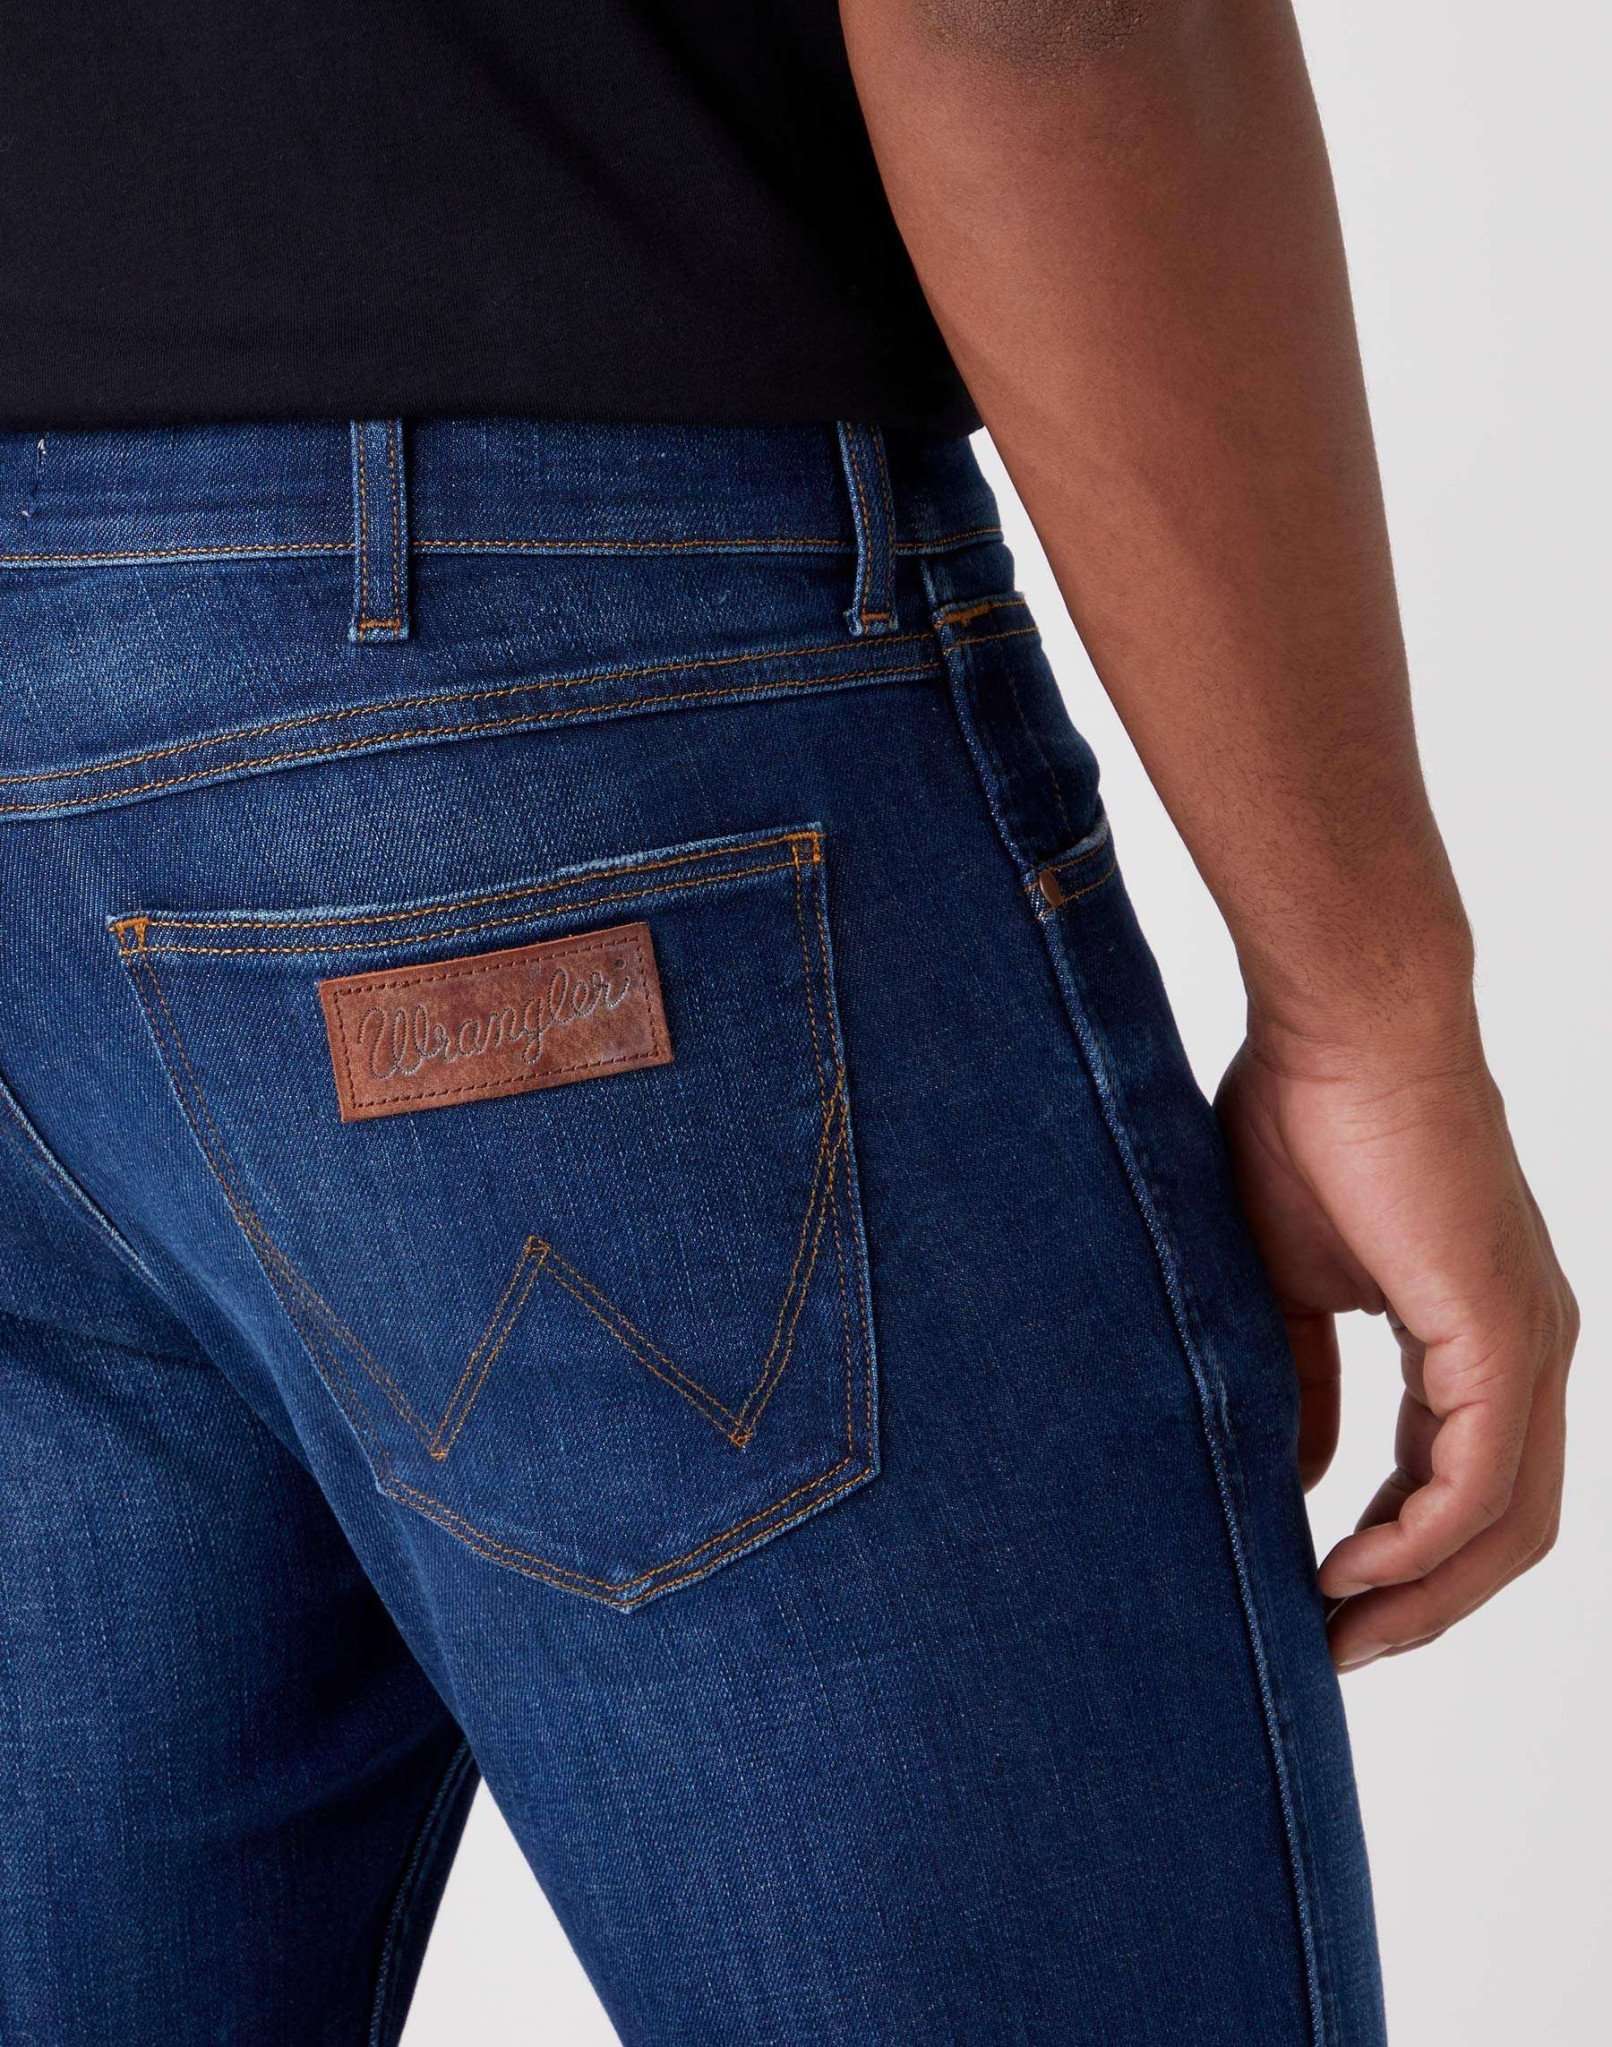 Greensboro Low Stretch in For Real Jeans Wrangler   